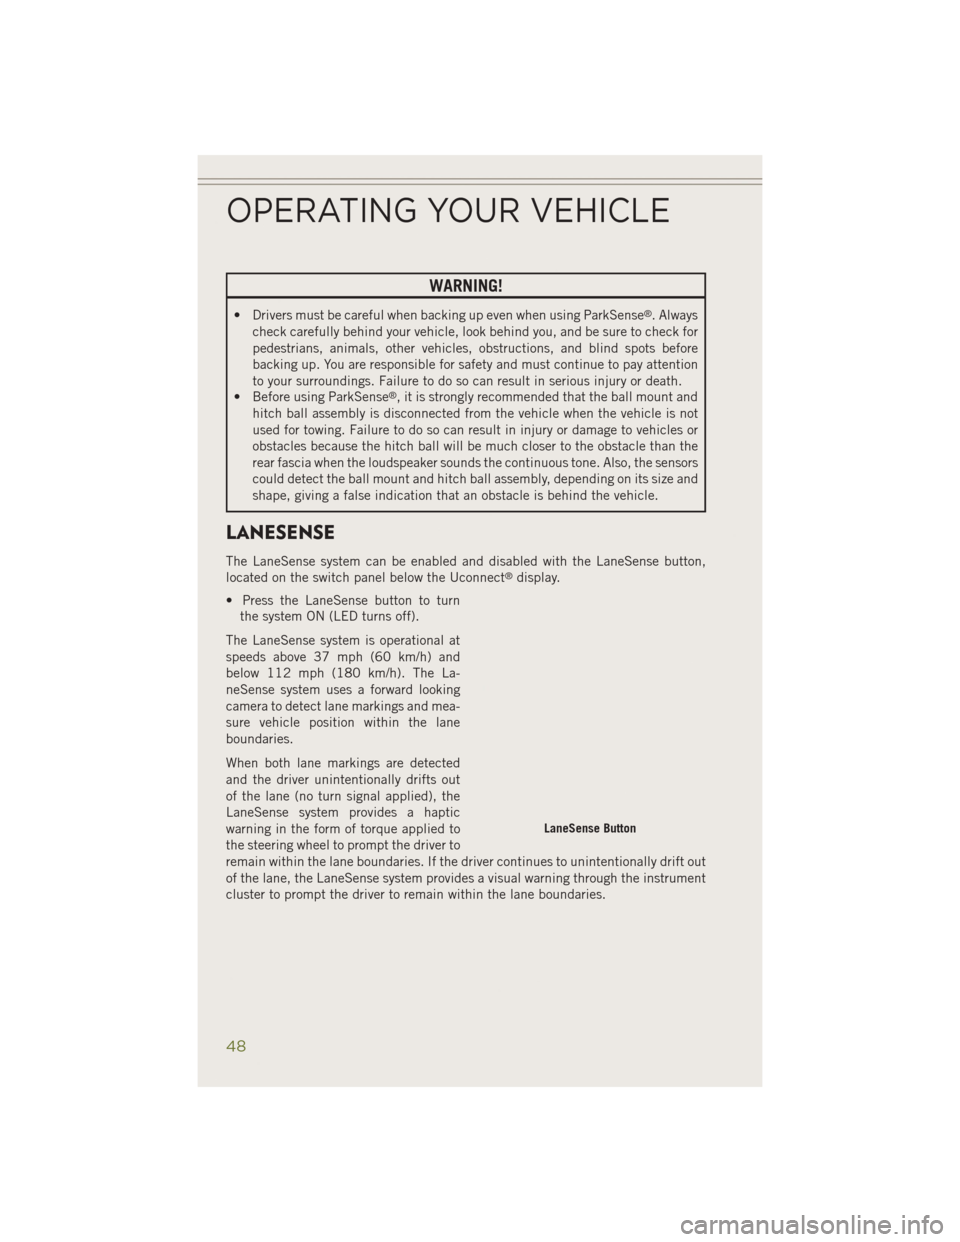 JEEP CHEROKEE 2014 KL / 5.G Owners Manual WARNING!
• Drivers must be careful when backing up even when using ParkSense®. Always
check carefully behind your vehicle, look behind you, and be sure to check for
pedestrians, animals, other vehi